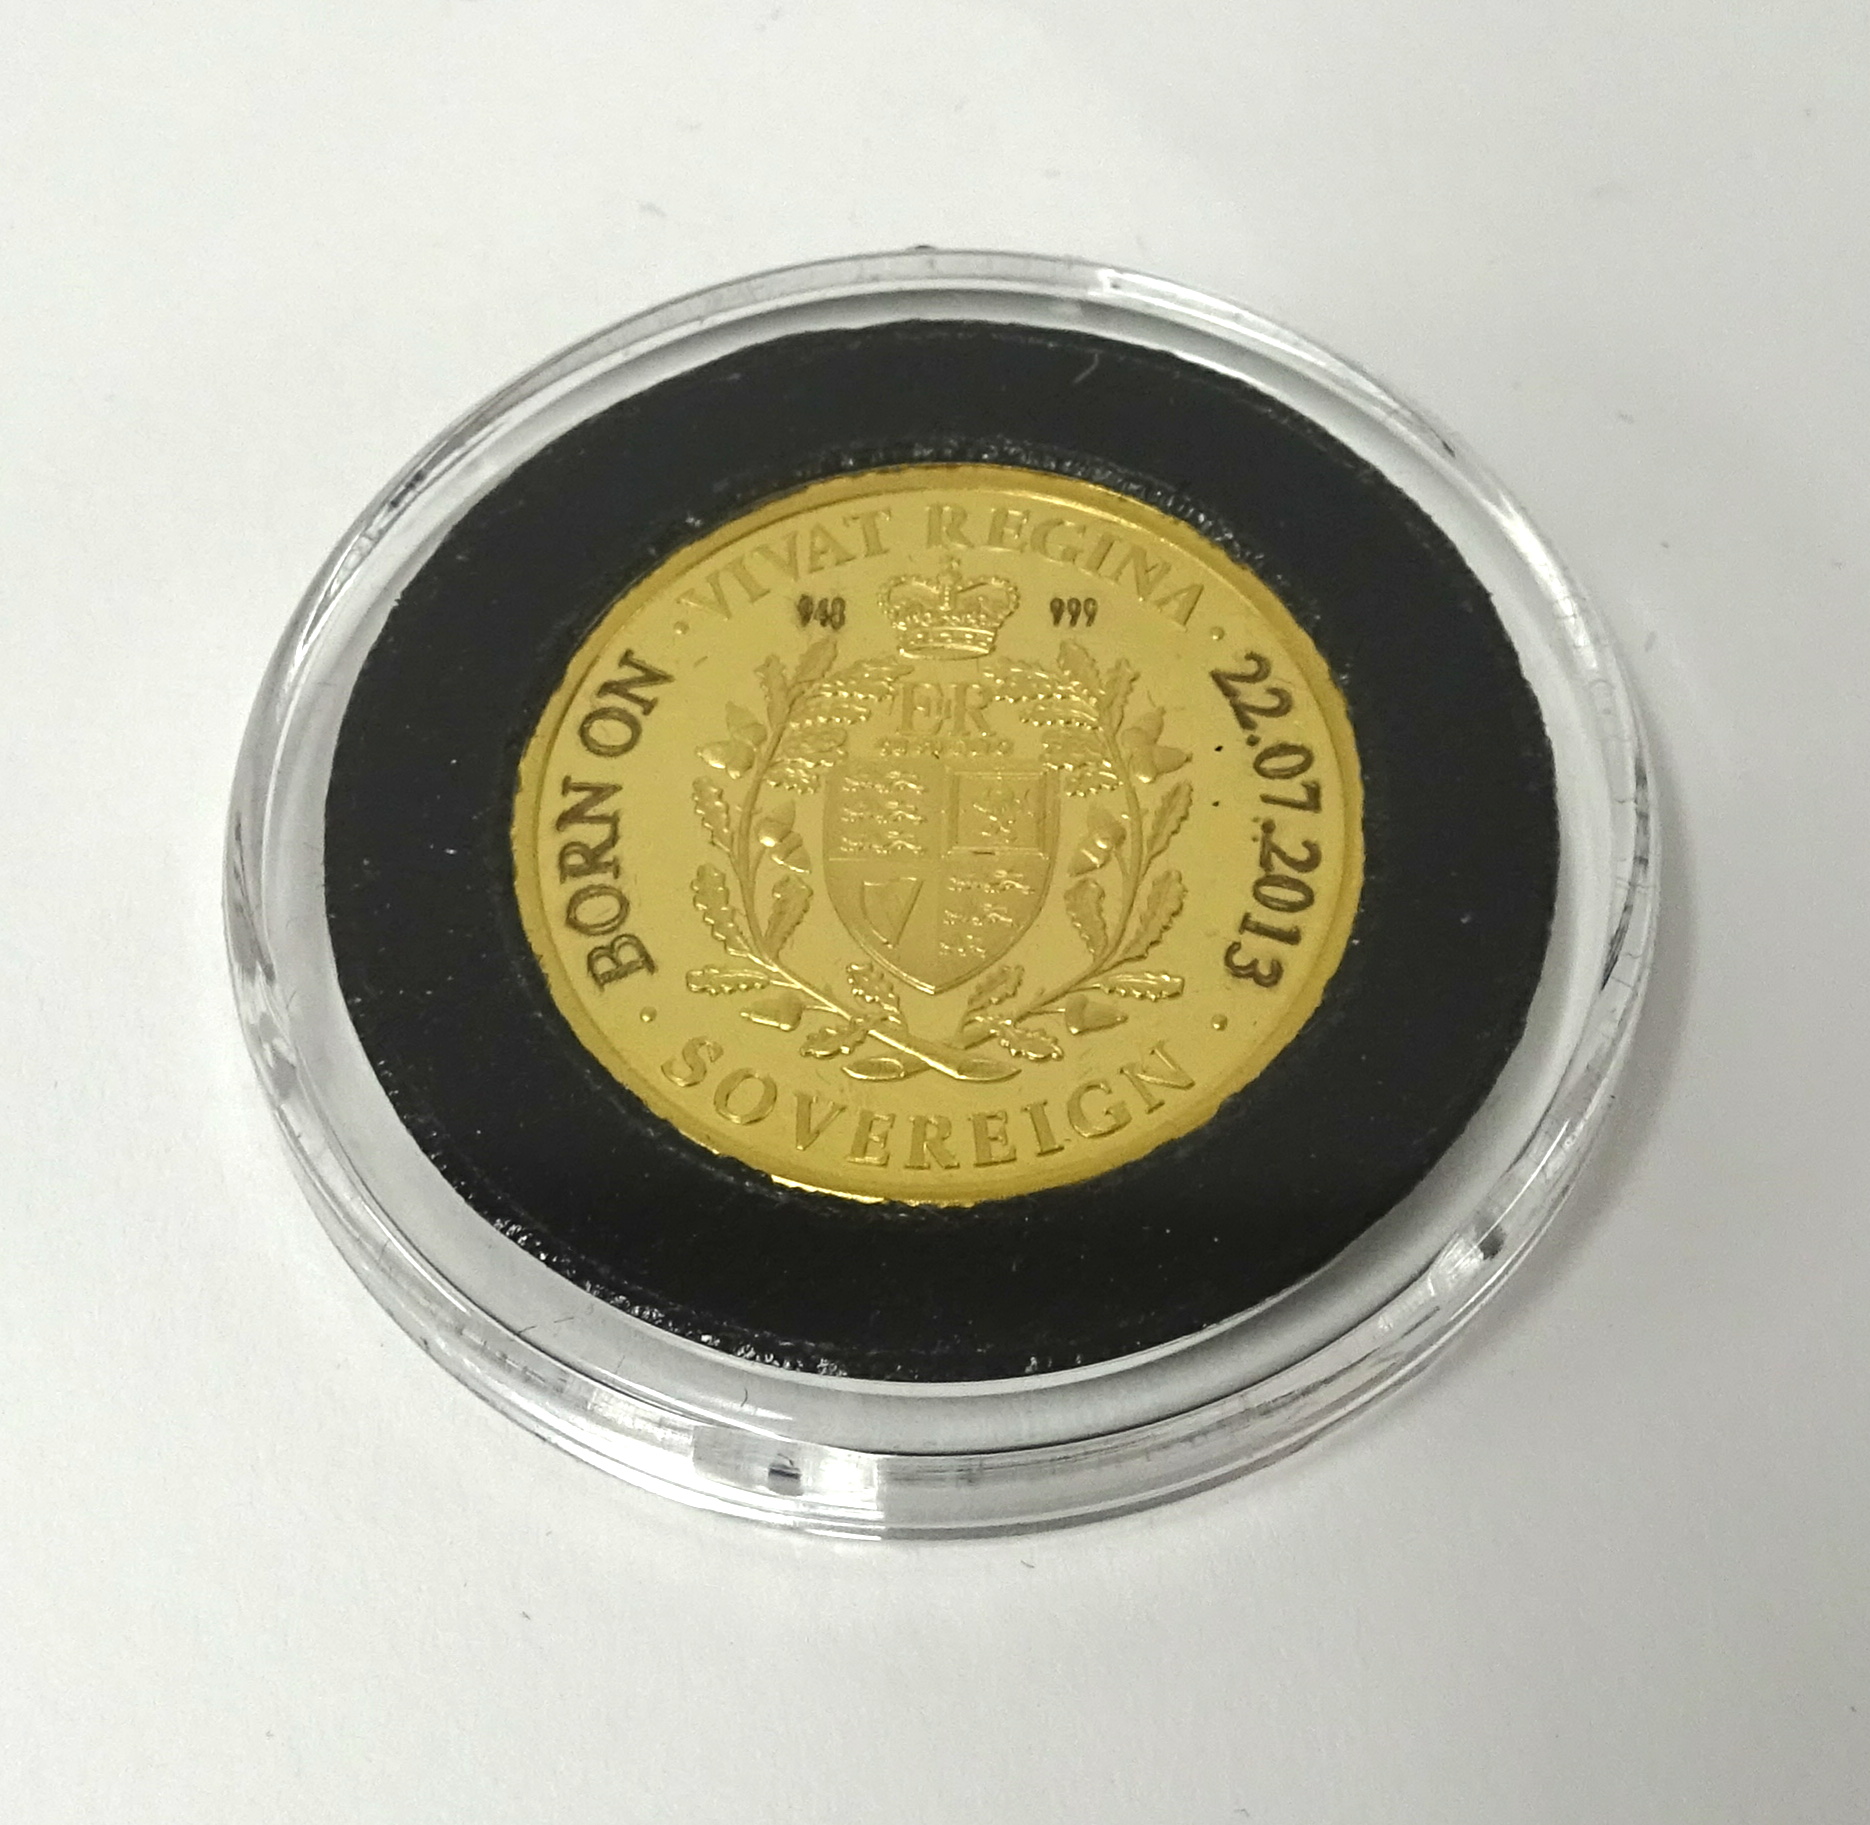 Royal Mint, QEII, proof, gold sovereign, 2013, Commemorating the birth of Prince George of Cambridge - Image 2 of 2